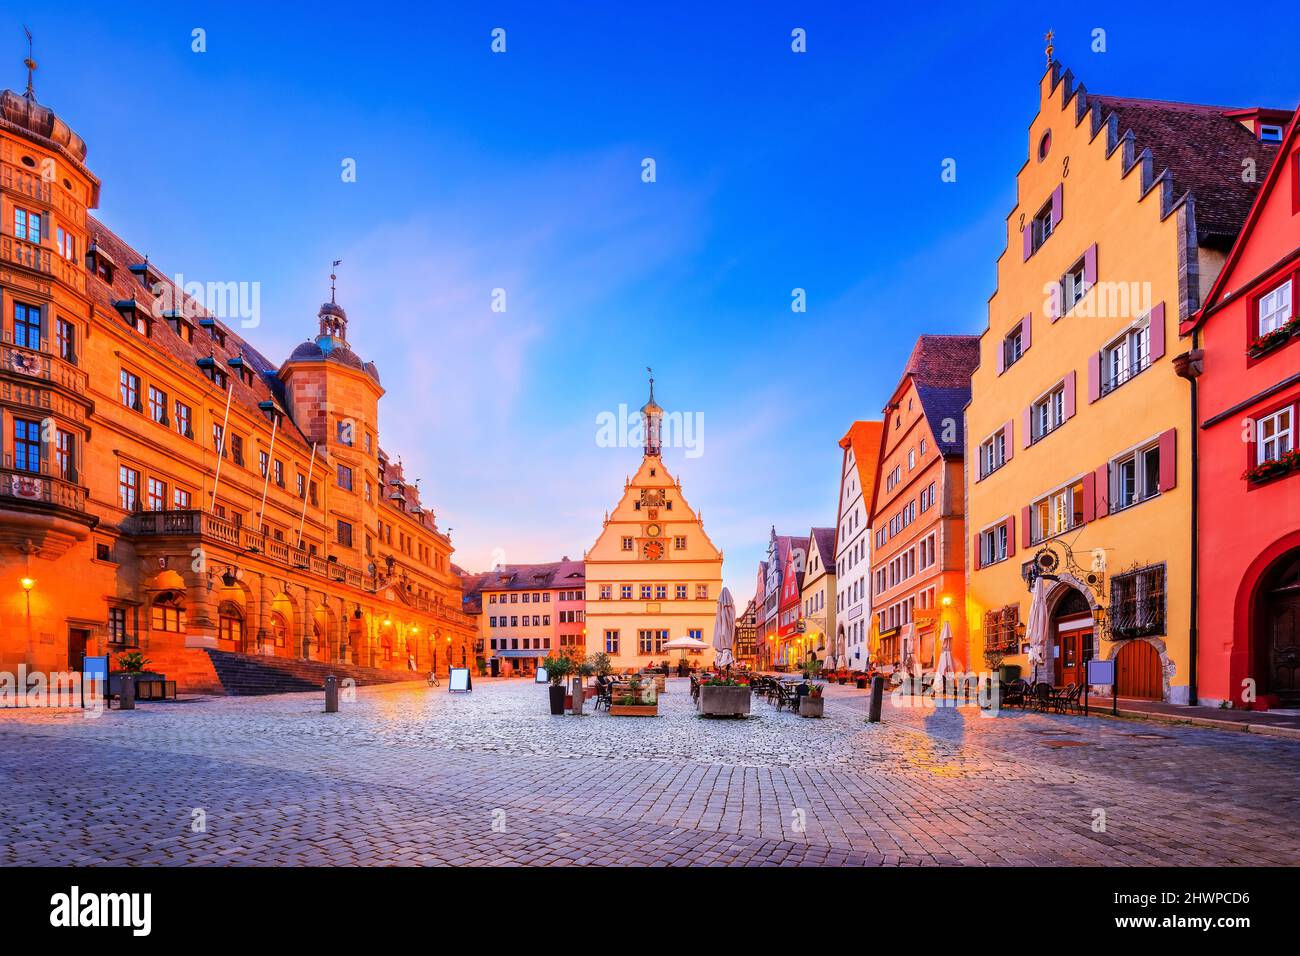 Rothenburg ob der Tauber, Bavaria, Germany. Medieval town of Rothenburg at night. Market Square and Town Hall. Stock Photo